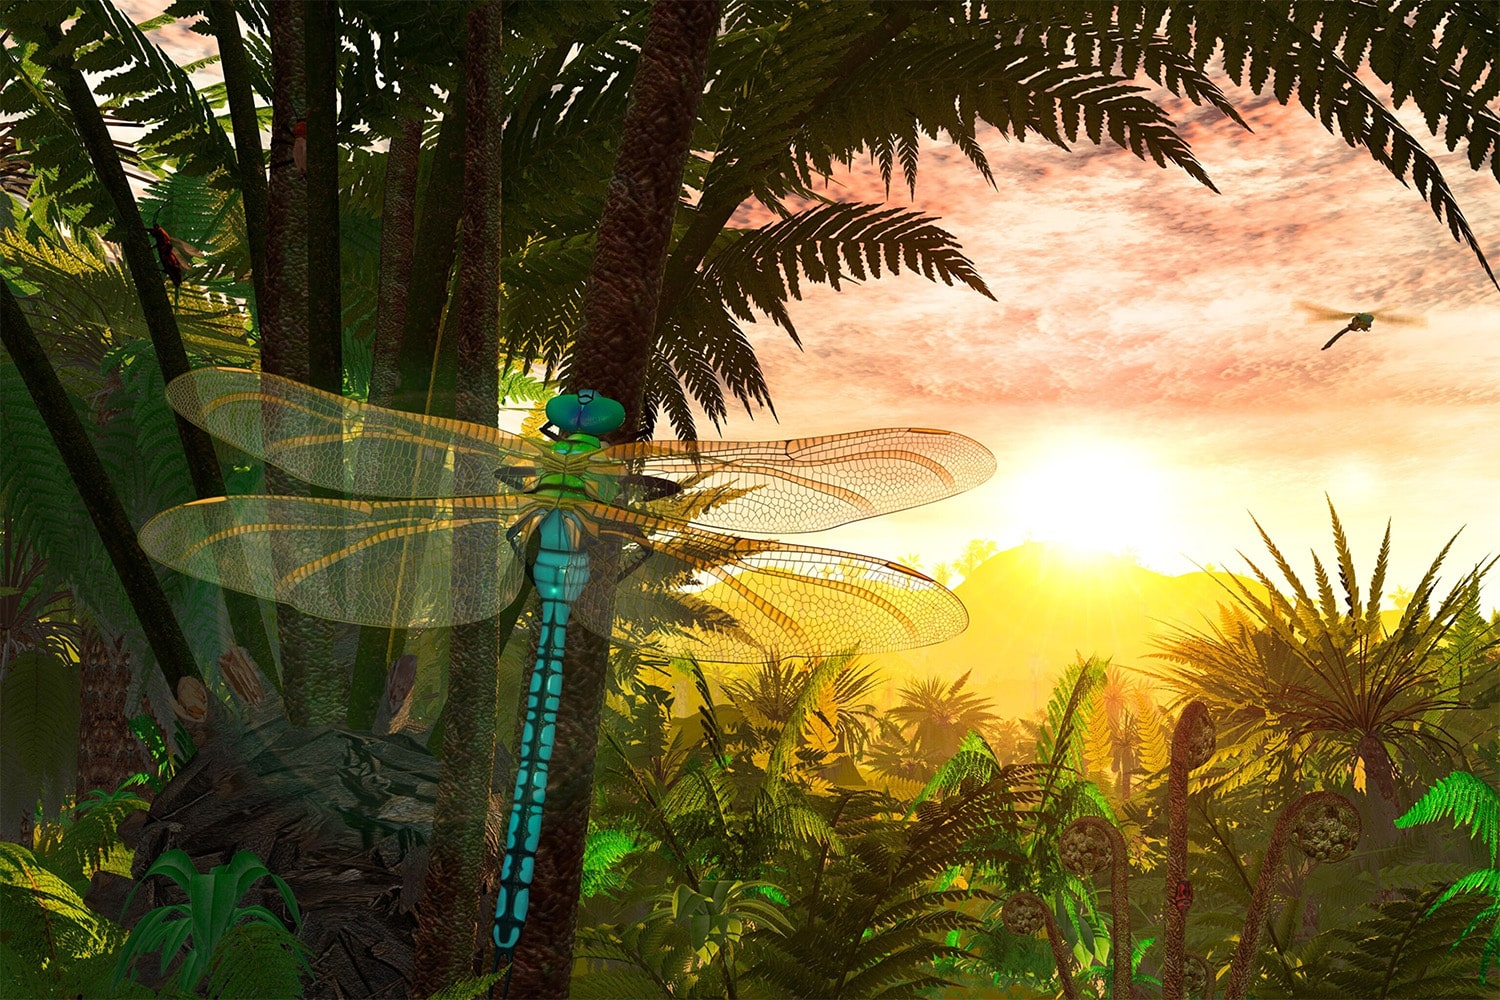 20 interesting facts about Meganeura (giant dragonfly)